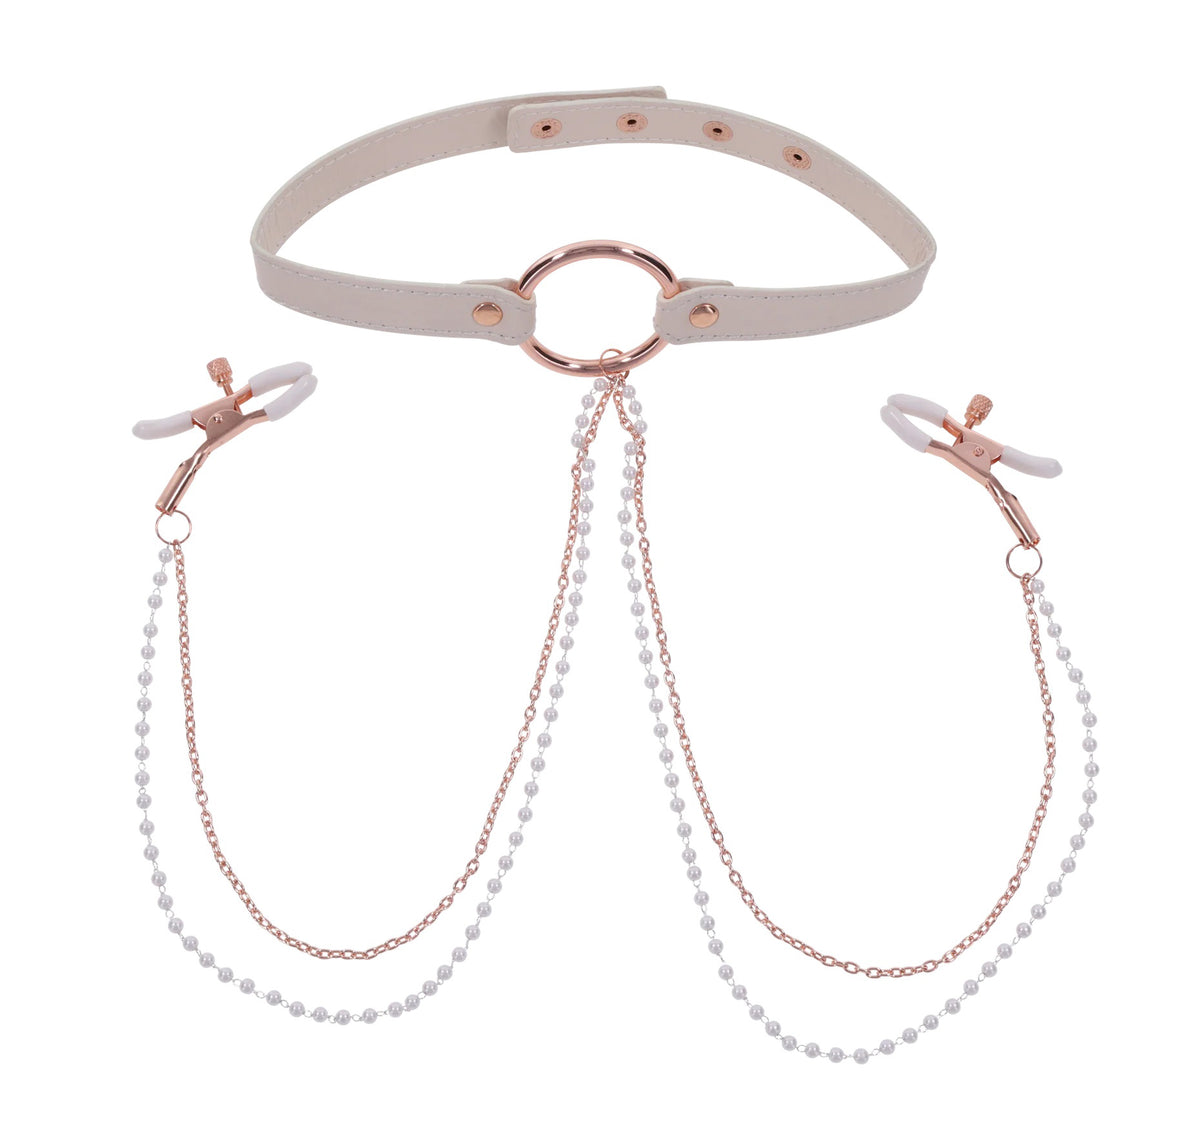 Peaches ‘N Creame Collar With Nipple Clamps - Pink